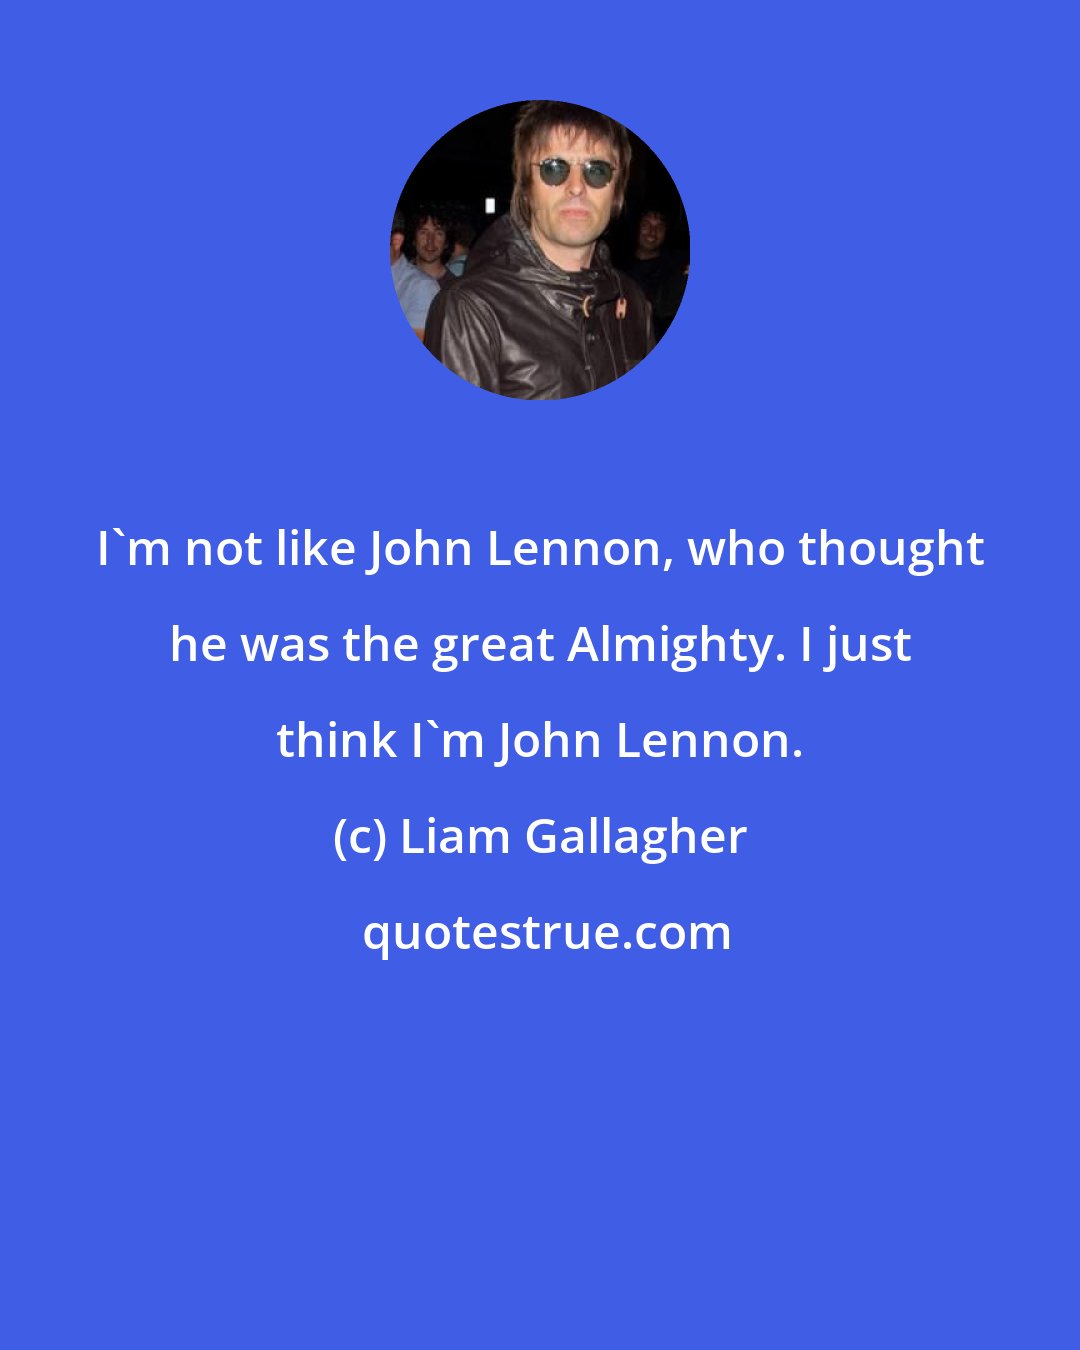 Liam Gallagher: I'm not like John Lennon, who thought he was the great Almighty. I just think I'm John Lennon.